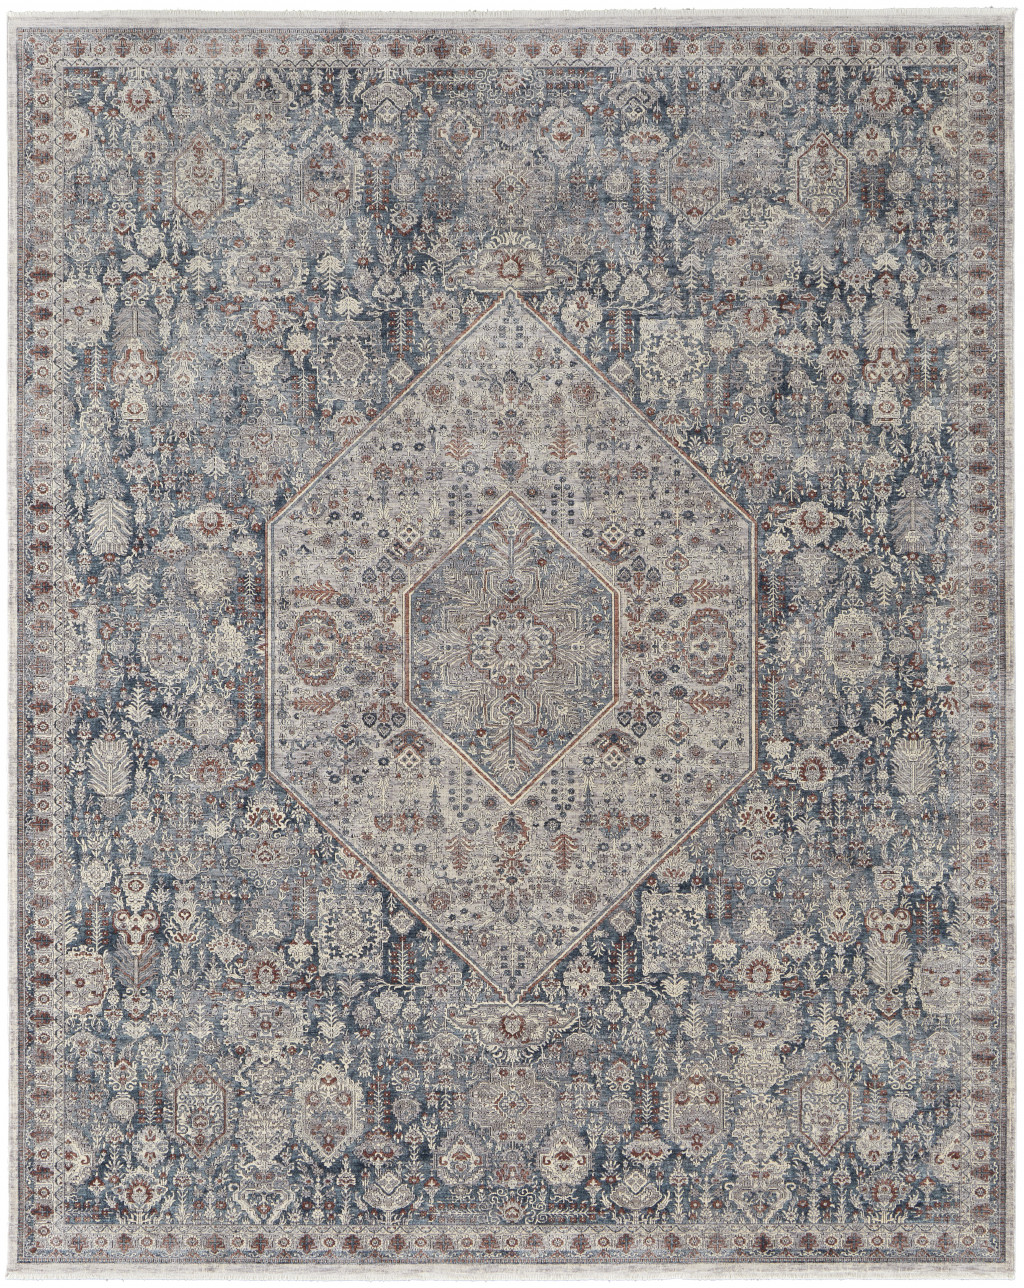 10' X 13' Blue And Ivory Floral Power Loom Stain Resistant Area Rug-514477-1